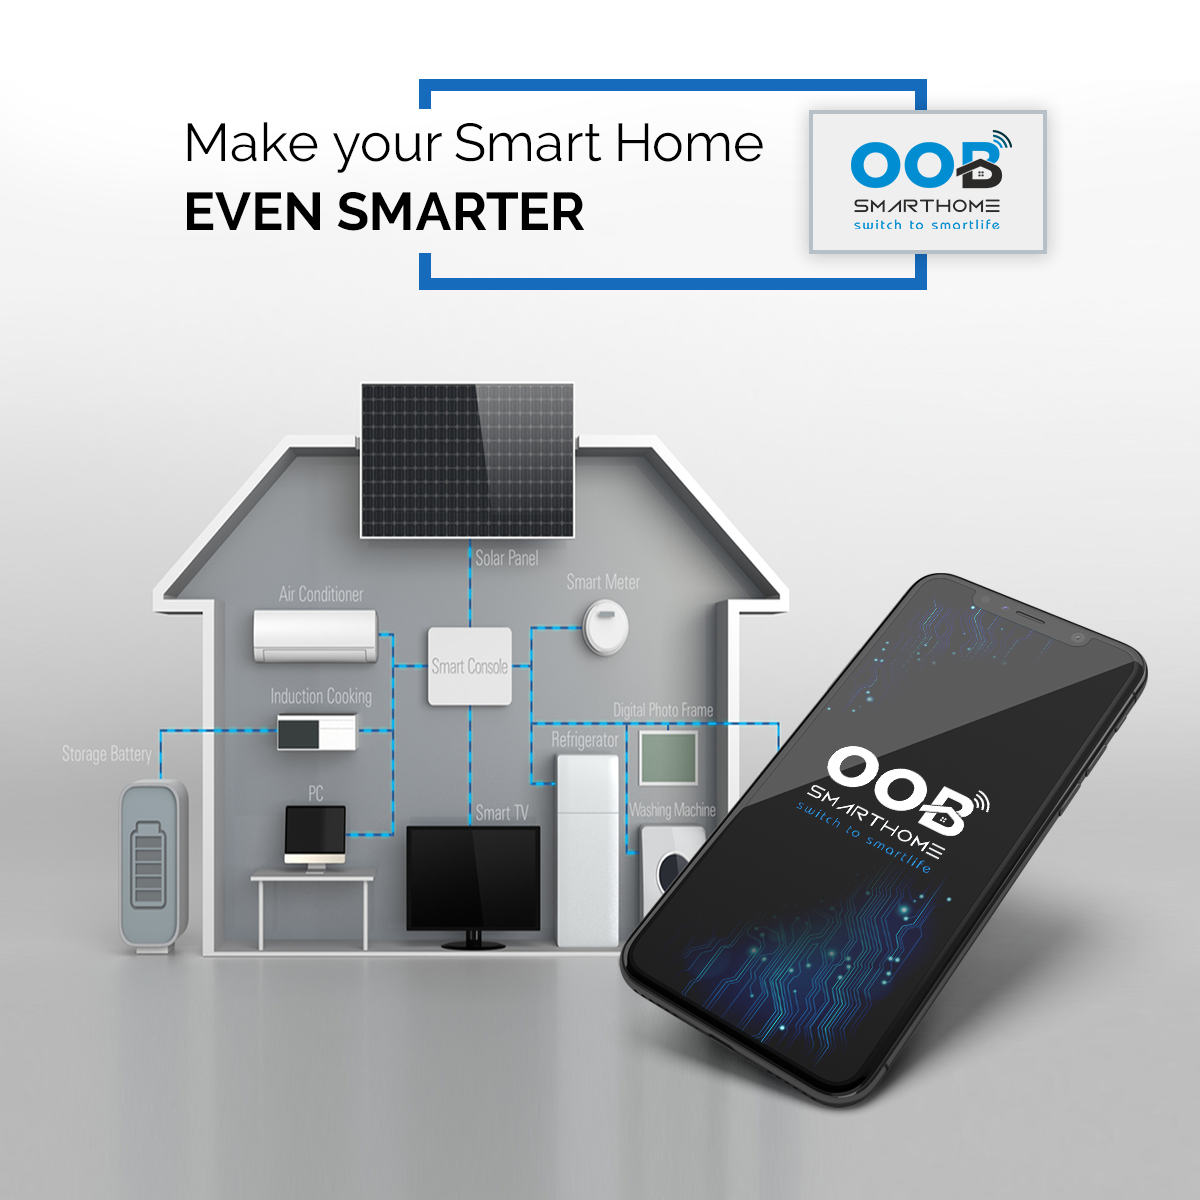 OOB Smart Switches Comply with the Highest Global Standard for Safety